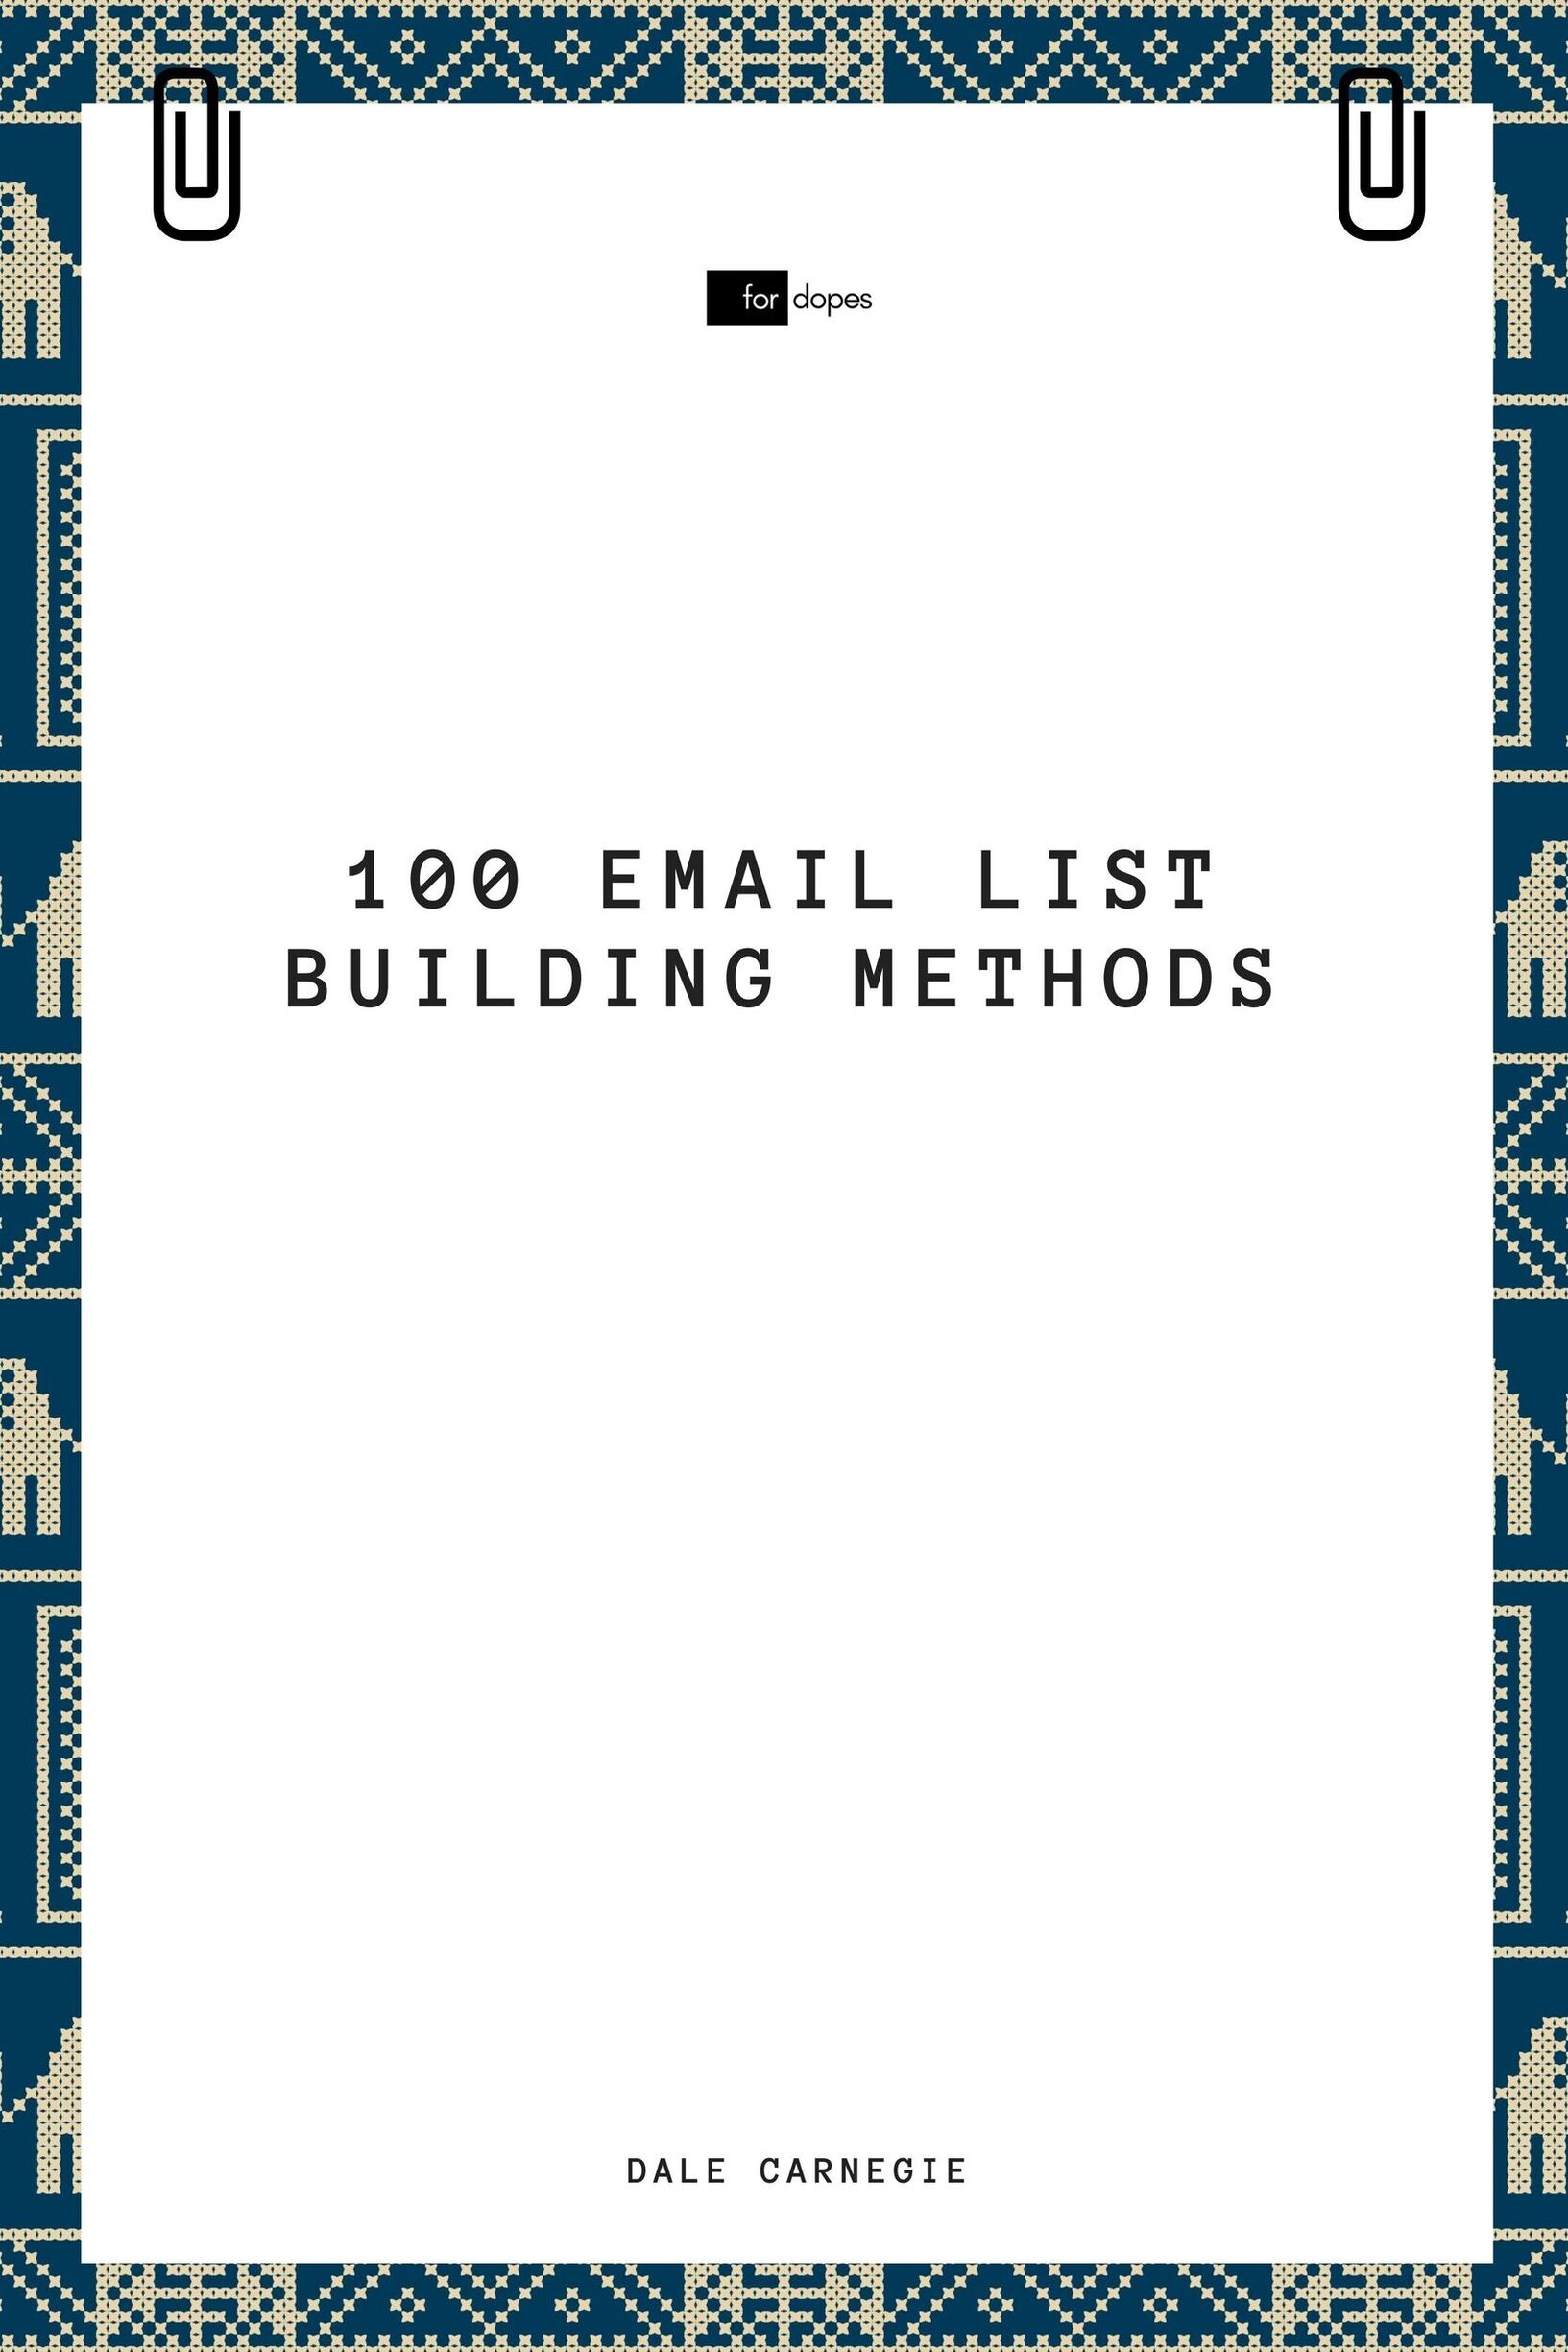 Learn How to Build an Email List